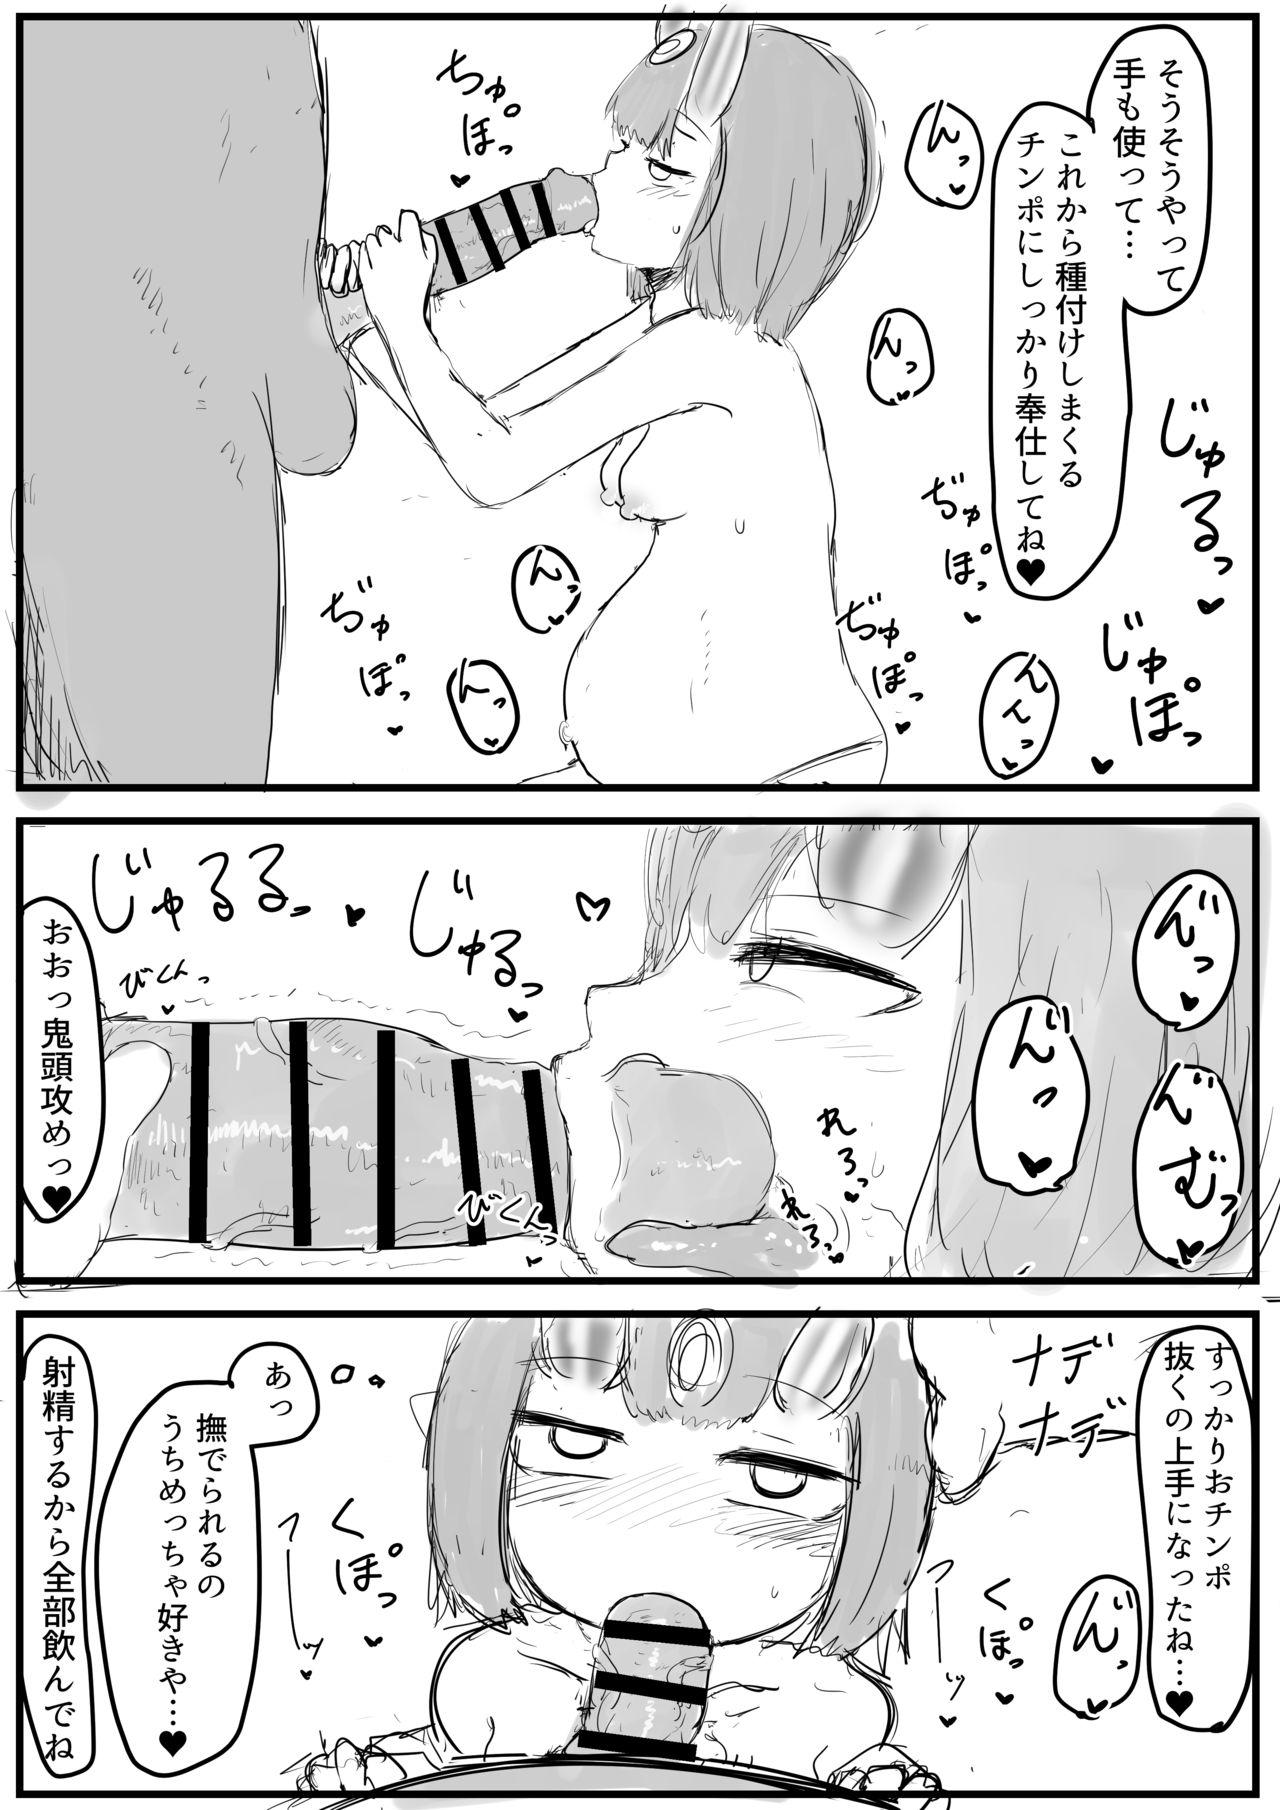 Domination ボテ腹酒吞童子ちゃんご出産 - Fate grand order Foreplay - Page 2